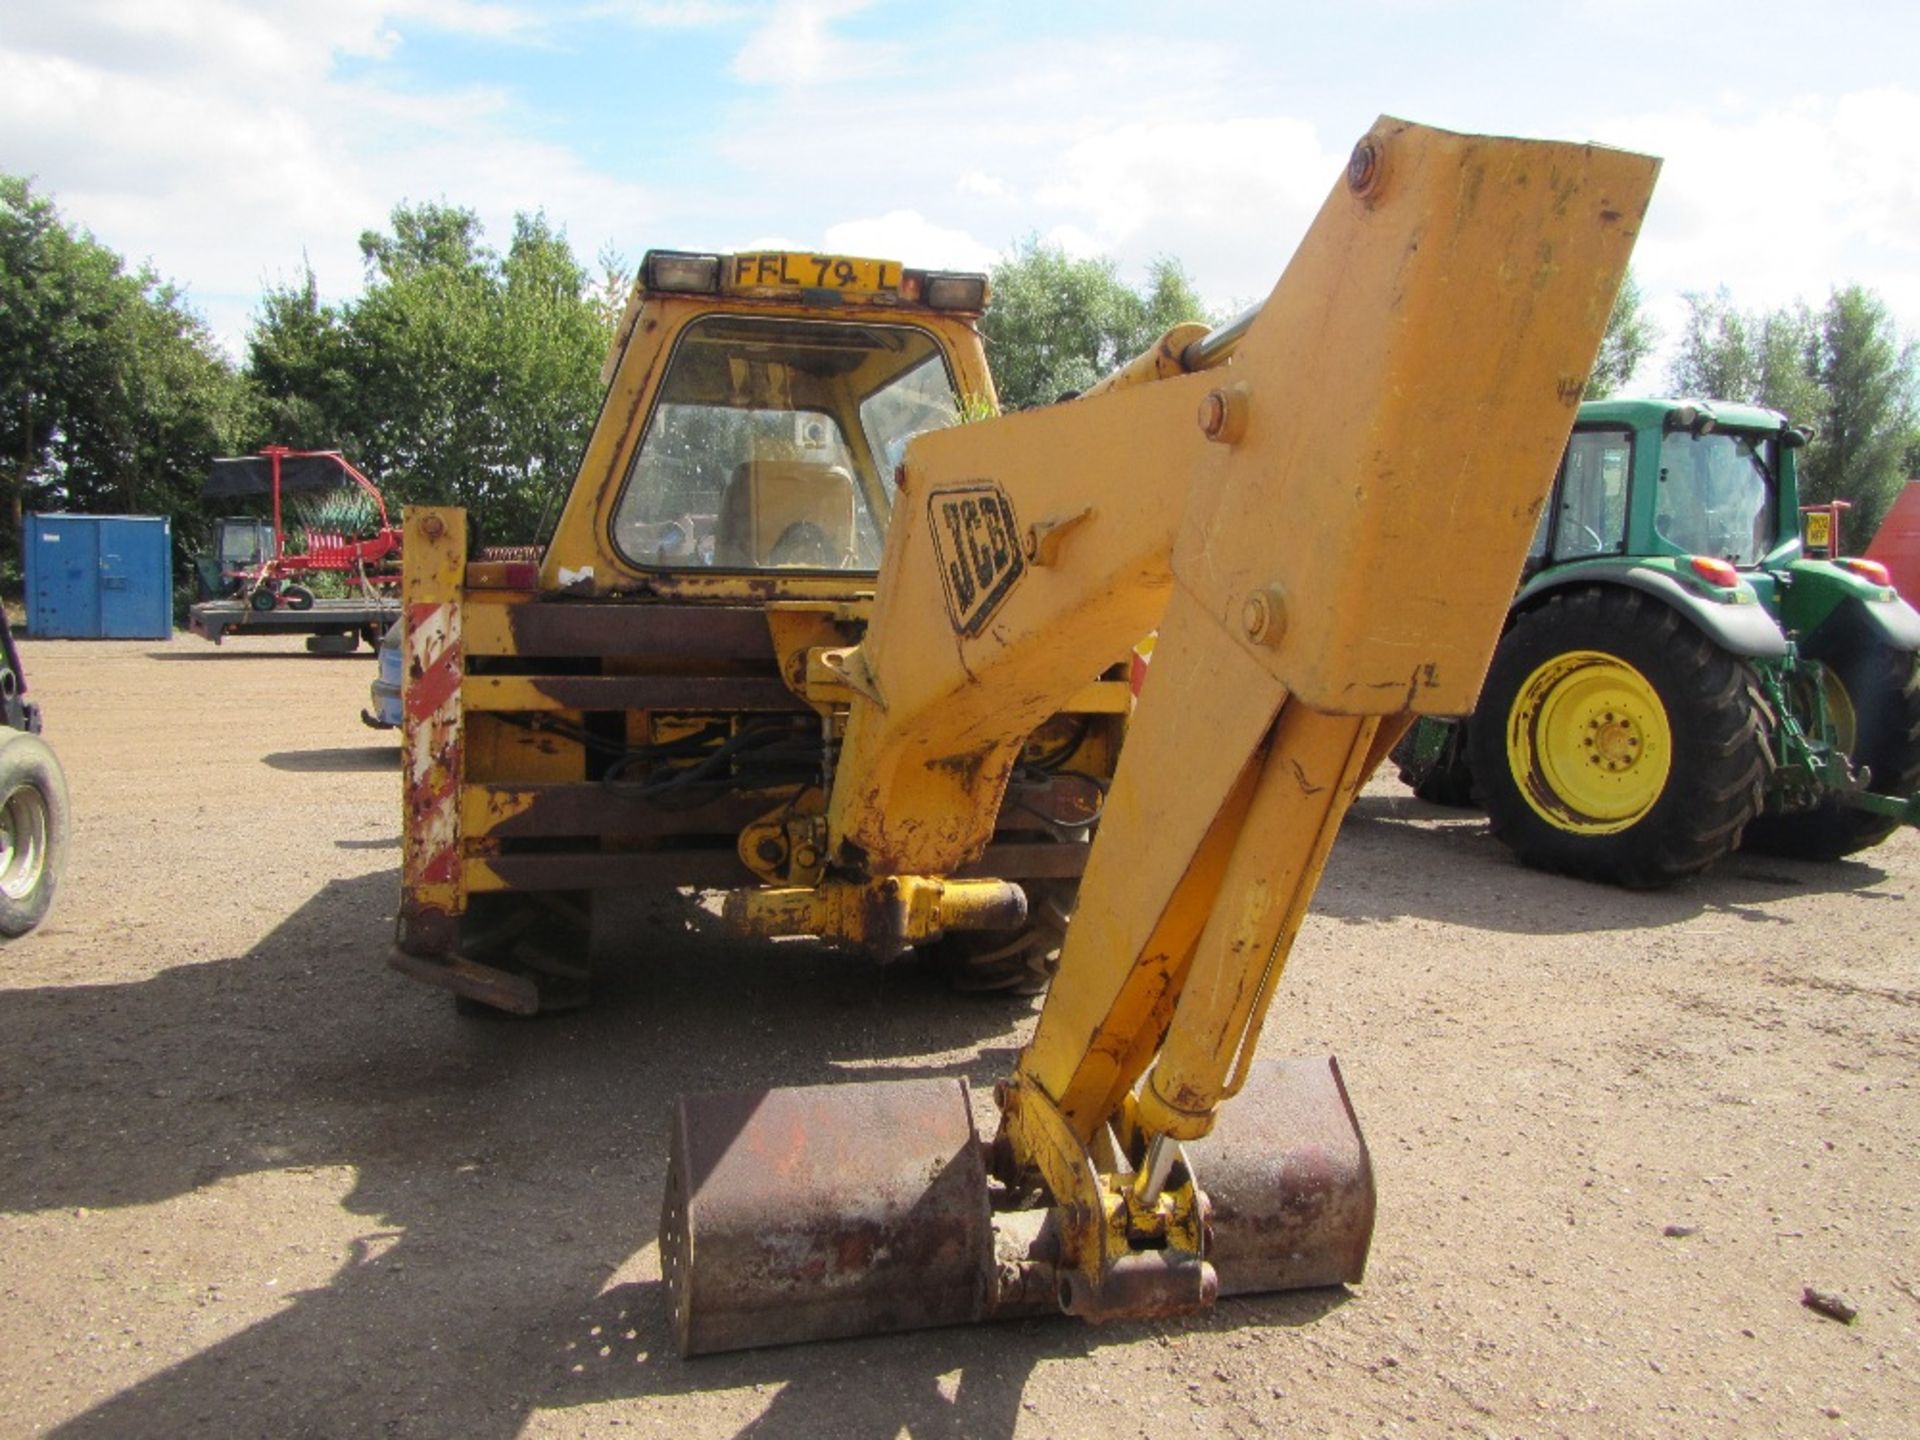 JCB 2C Digger with 4 in 1 & Ditching Bucket. V5 will be supplied. Reg. No. FFL 790L Ser No 3C53474 - Image 4 of 4